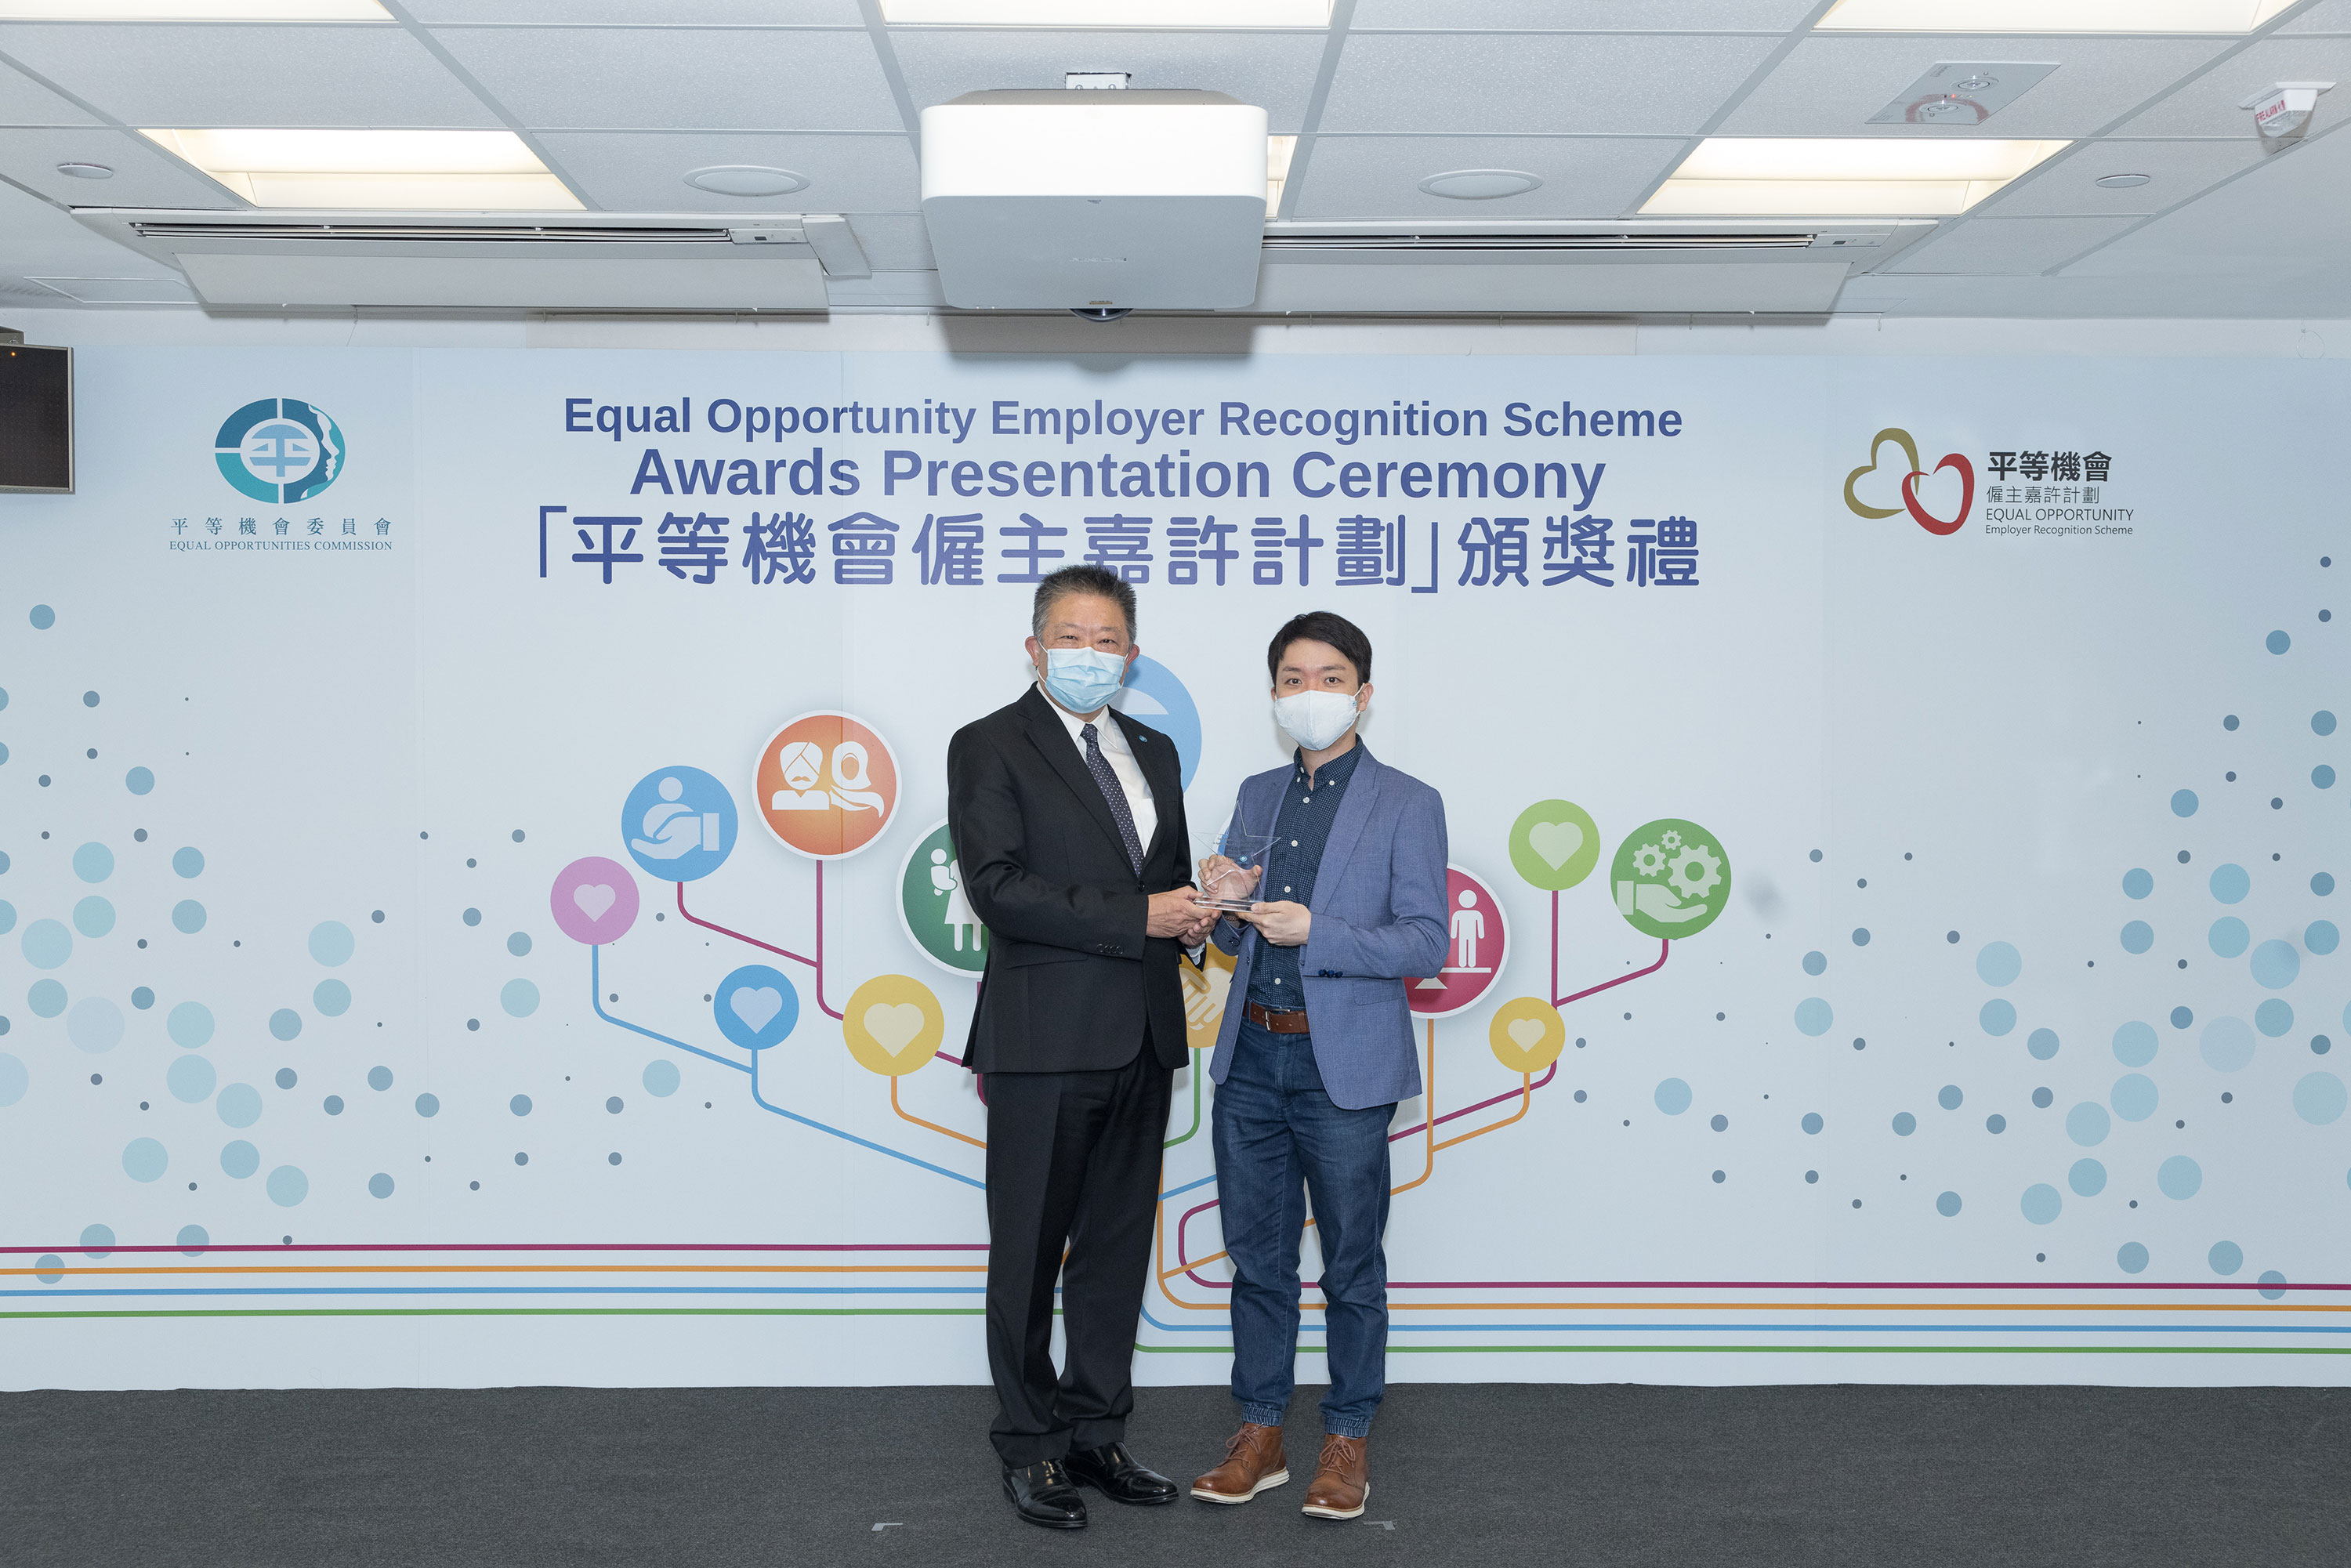 Mr Ricky CHU Man-kin, IDS, Chairperson of the Equal Opportunities Commission (left) presents souvenir to Founder of WEDO Global Mr Bosco NG (right), who served as member of the assessment panel of the Equal Opportunity Employer Recognition Scheme.